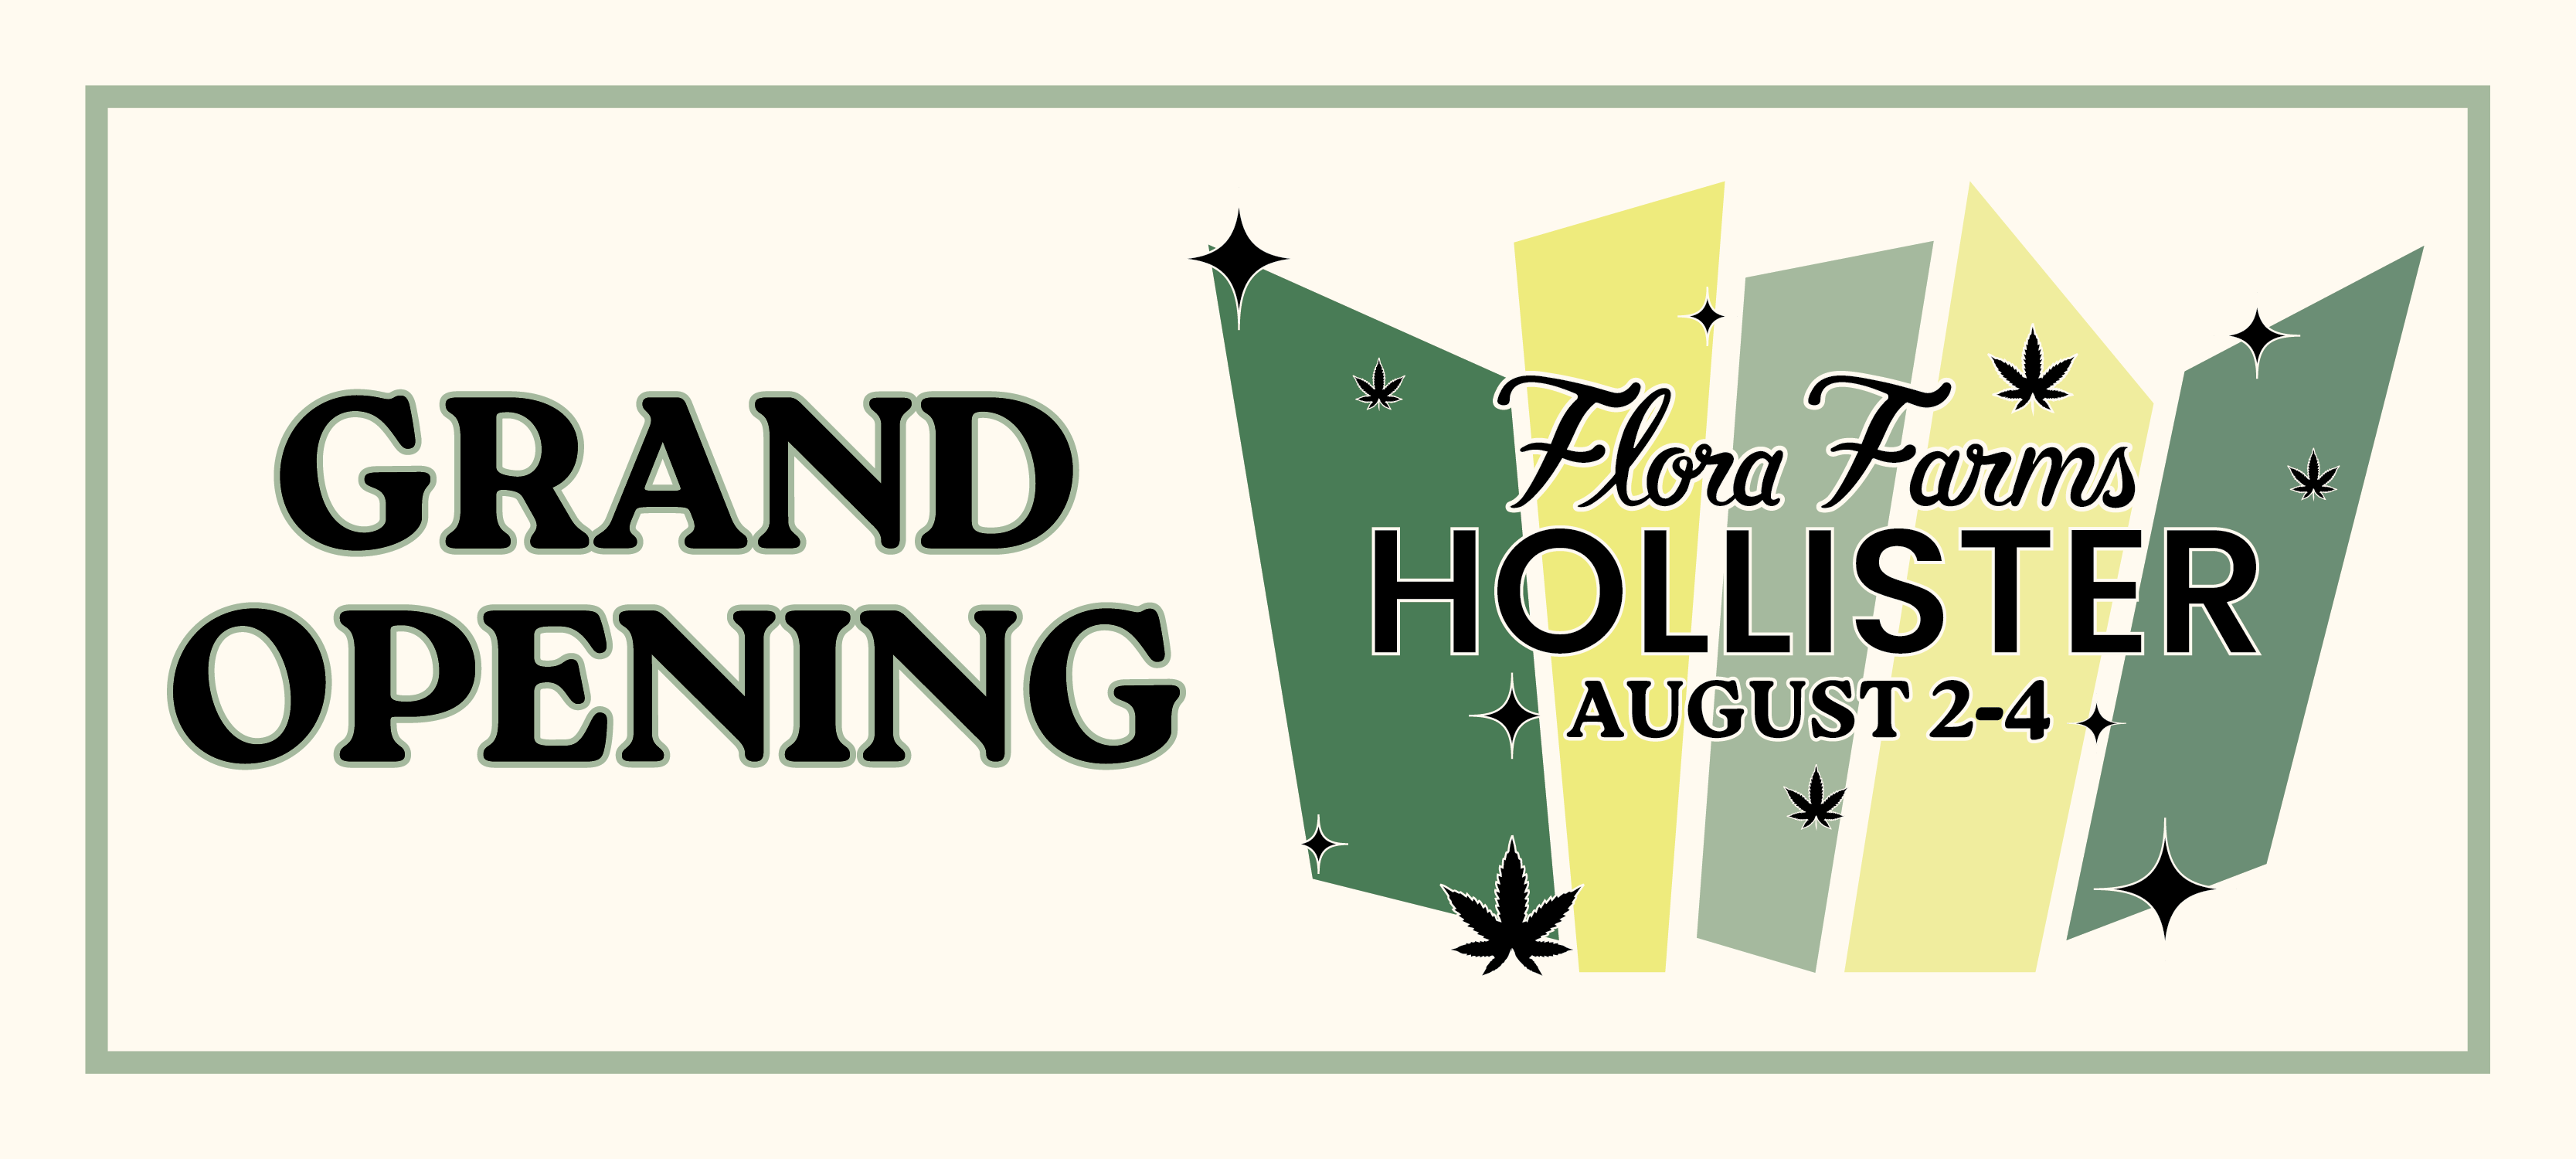 Hollister Dispensary Grand Opening Extravaganza